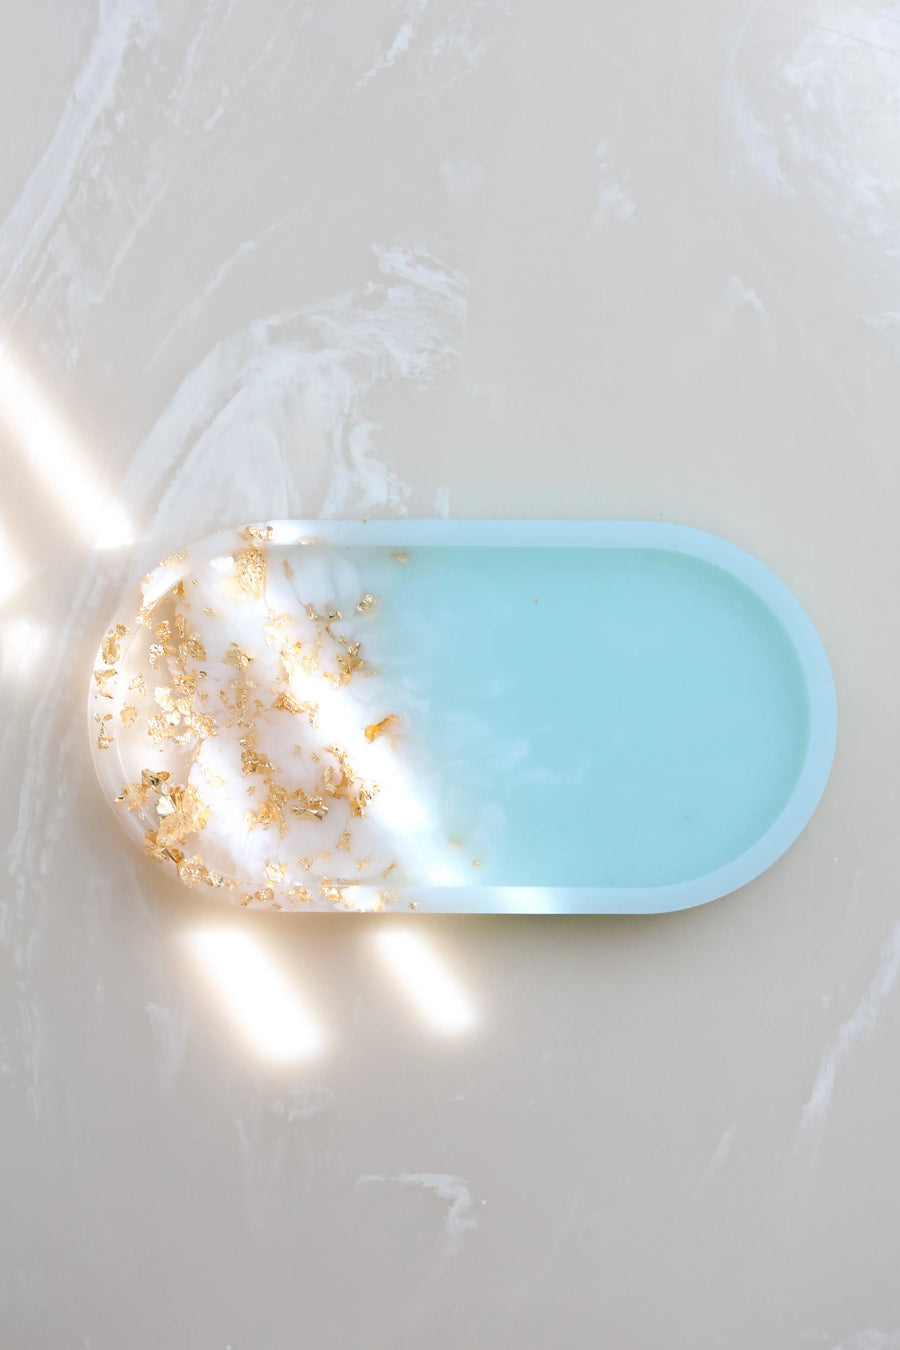 Esselle Oval Vanity Tray in Coastal or Crushed Glass